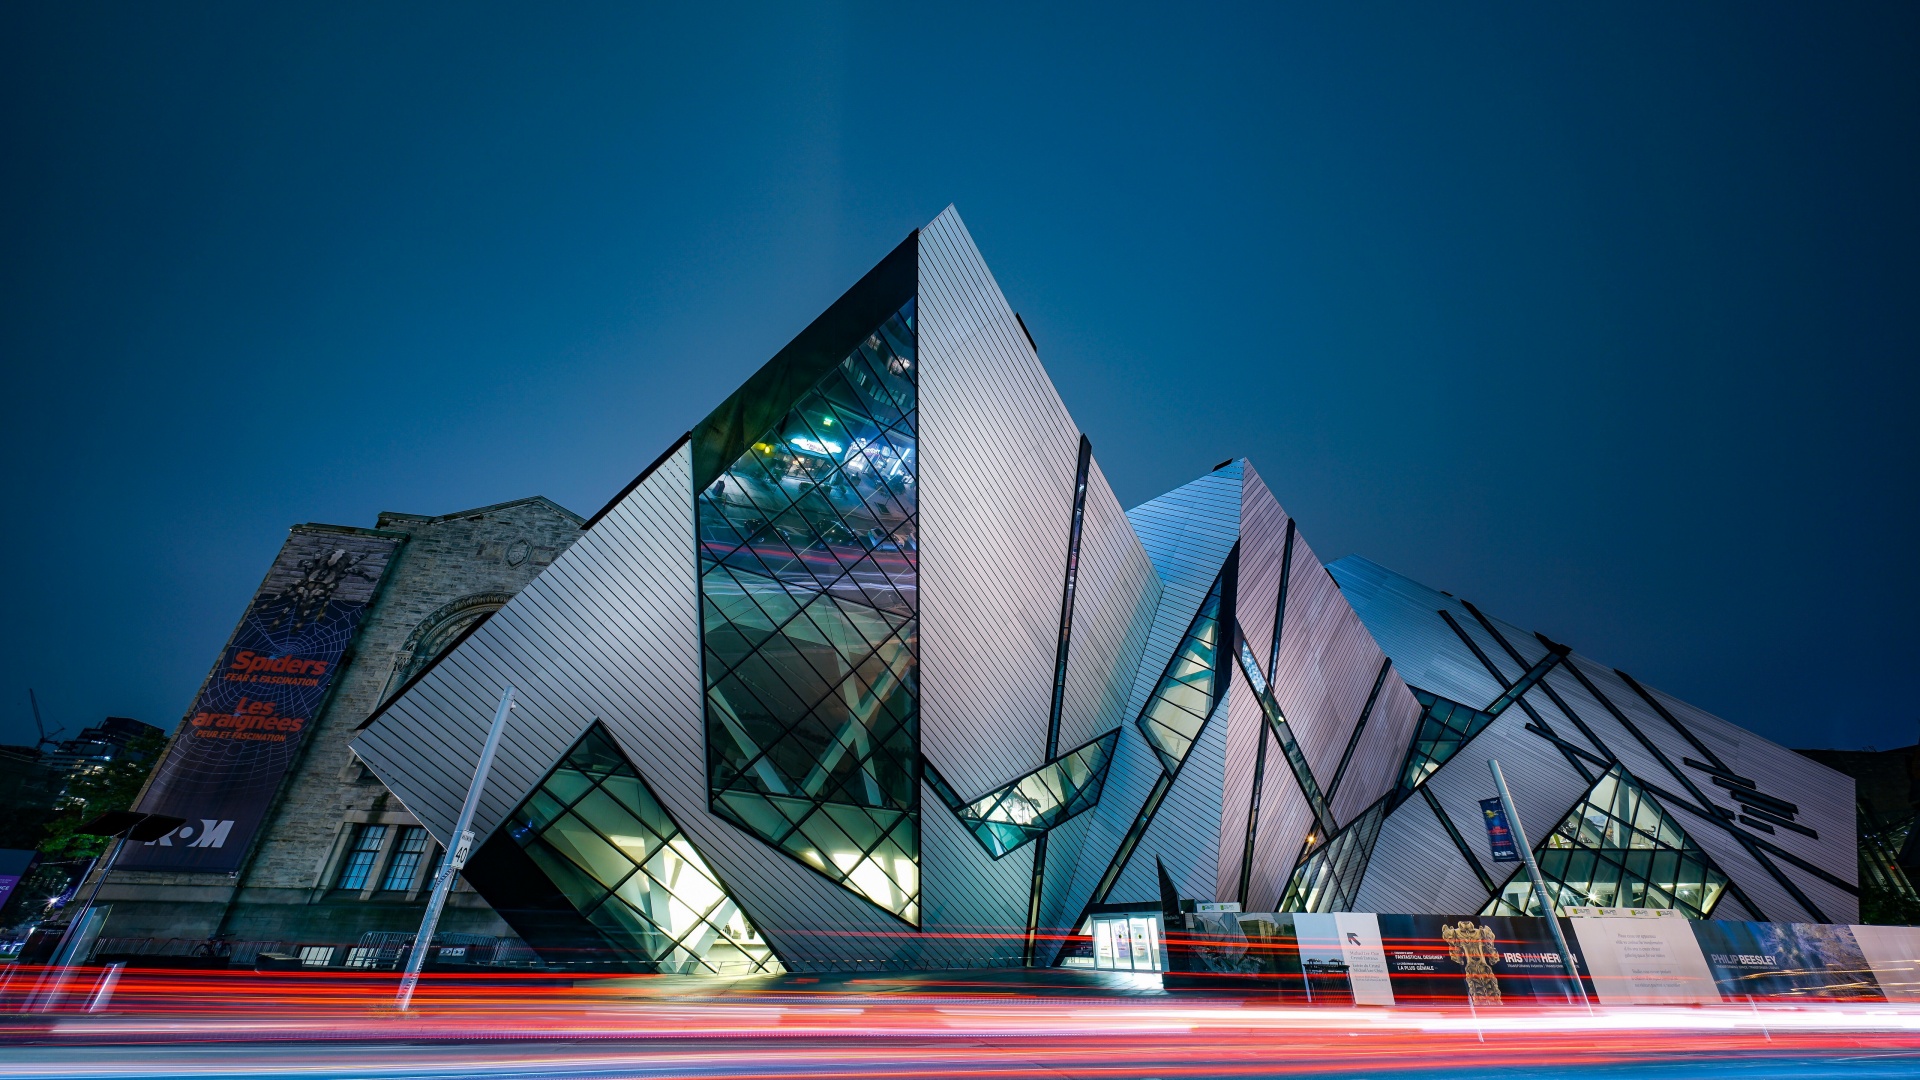 What is the title of this picture ? Royal Ontario Museum 4K Wallpaper, Toronto, Canada, 5K, Architecture, #4877